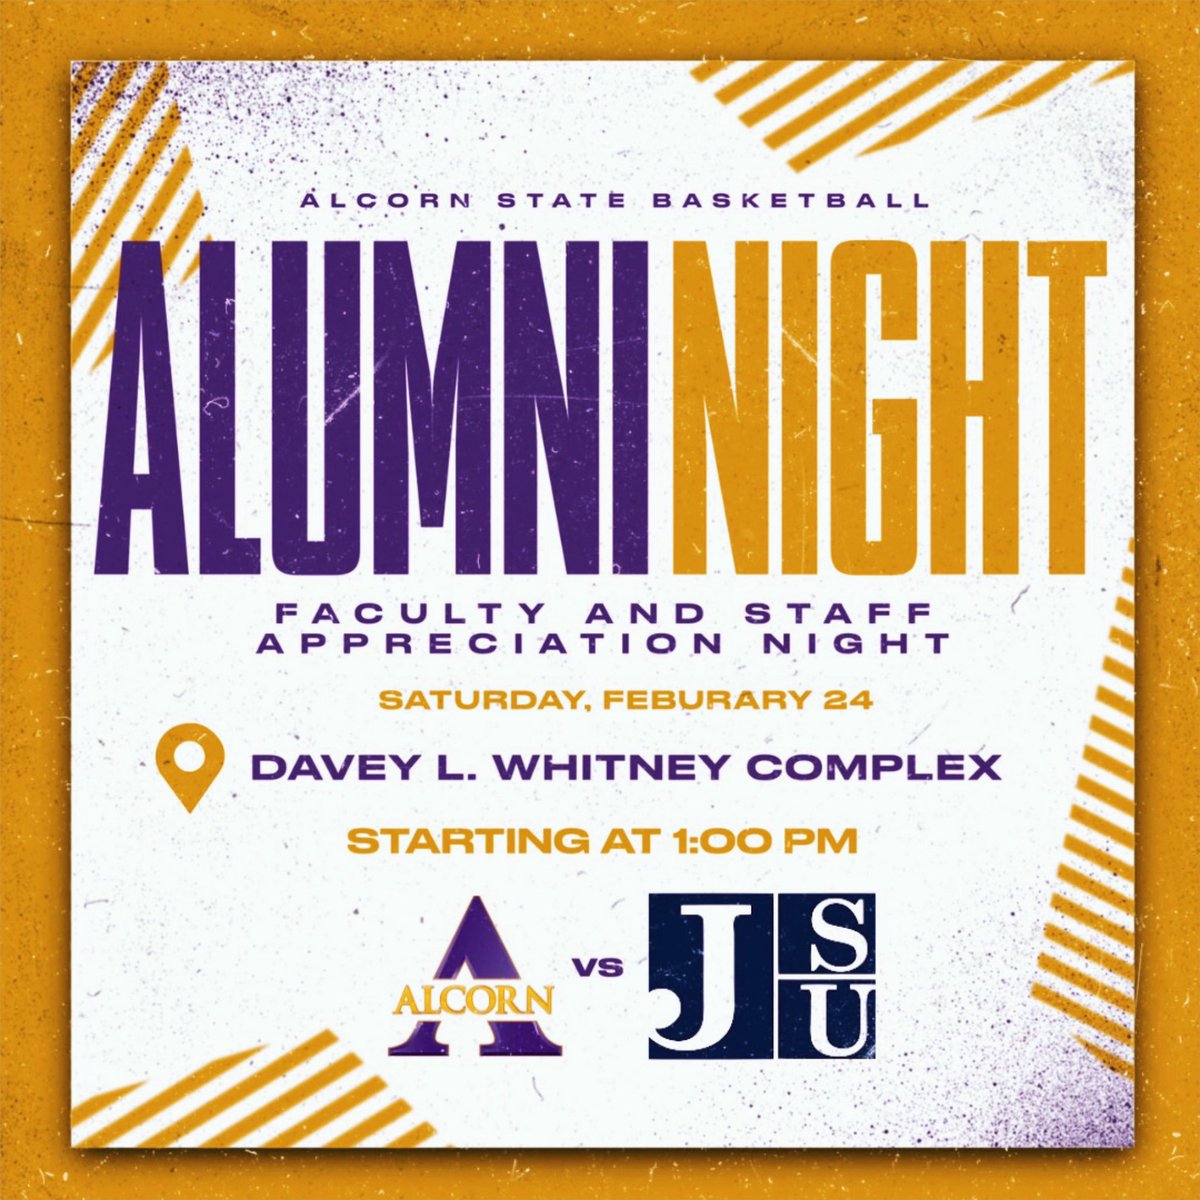 📣 Calling out all Proud Alumni, Faculty and Staff of Alcorn State University 📣 BIG match-up this Saturday for your Braves as they take on rival team, Jackson State starting at 1:00 PM. SUPPORT YOUR BRAVES AND PACK THE WHITNEY WITH THE MOST ELECTRIFYING ENERGY YET THIS SZN ⚡️